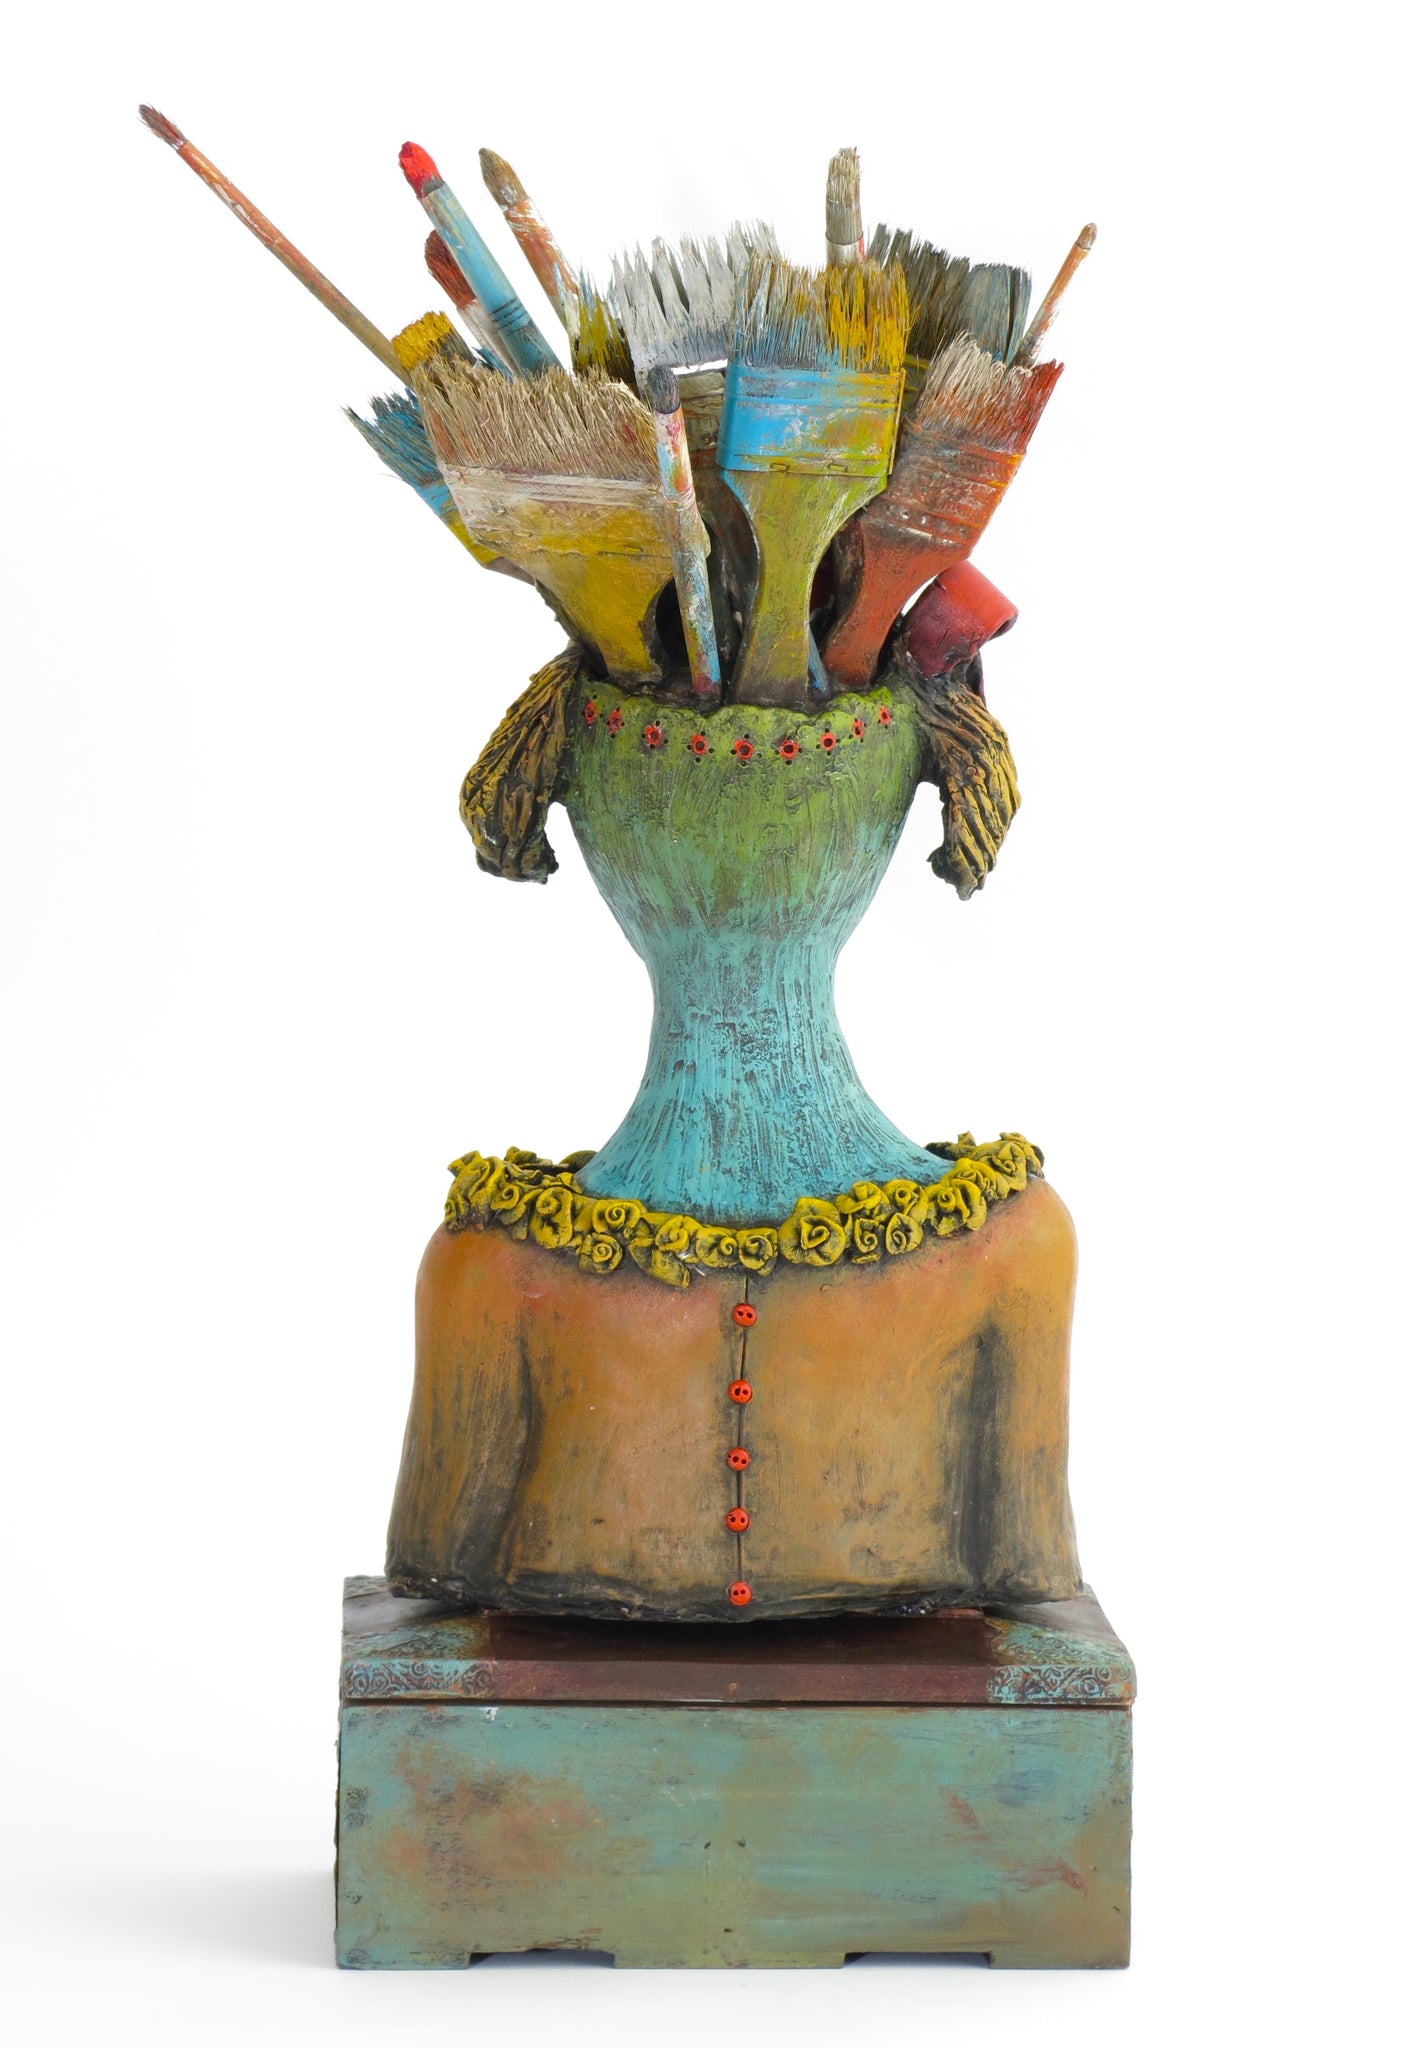 SOLD   "Recounting My Many Brushes With Death" Original ceramic sculpture by Jacquline Hurlbert